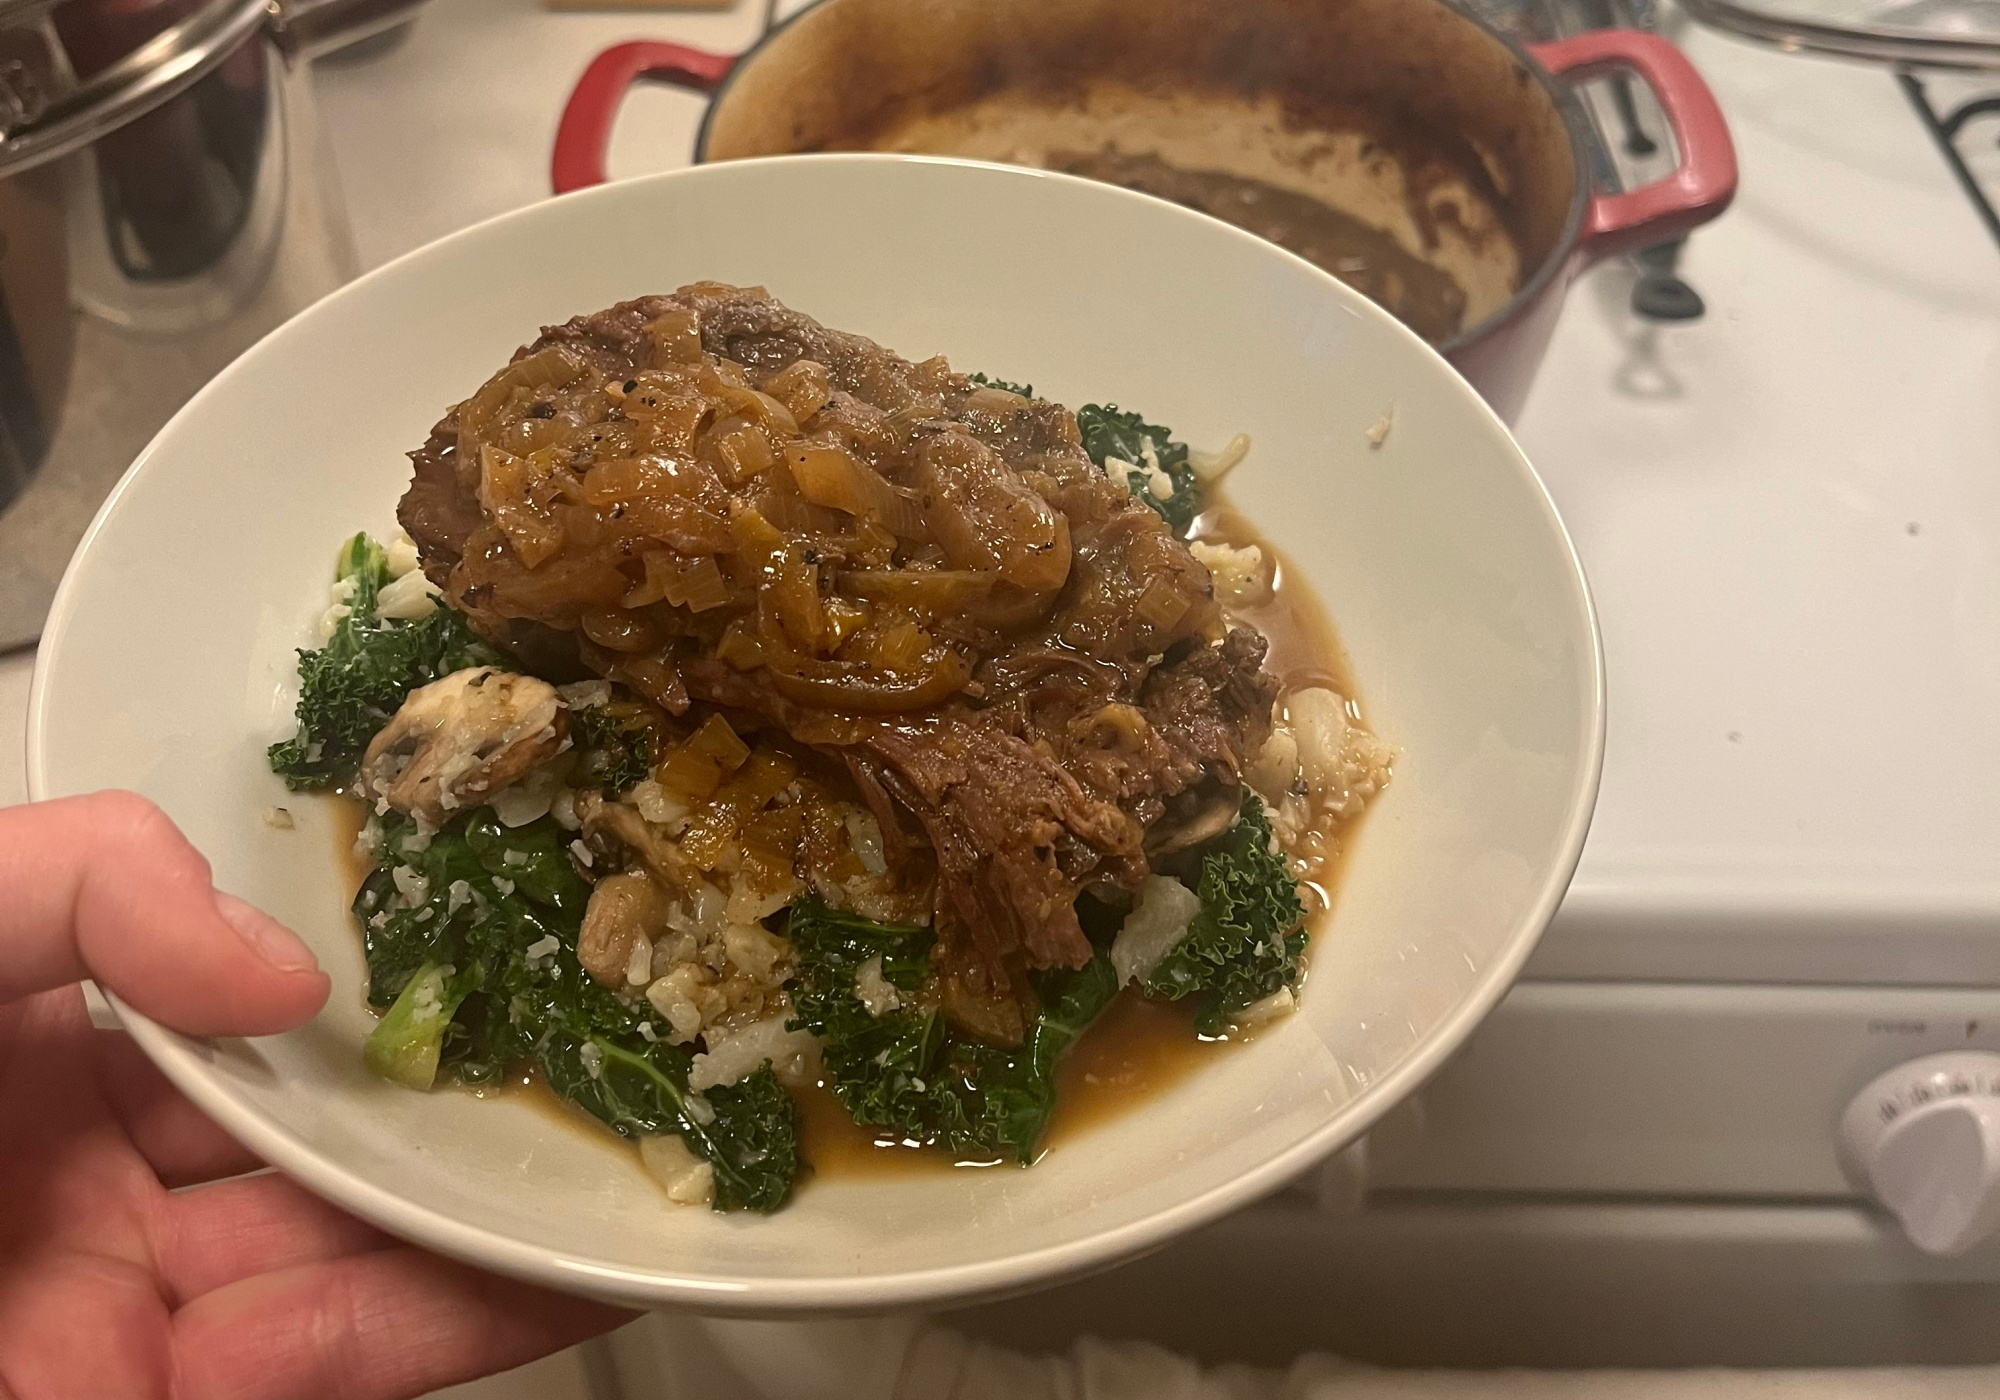 A braised dish made with old elk meat.